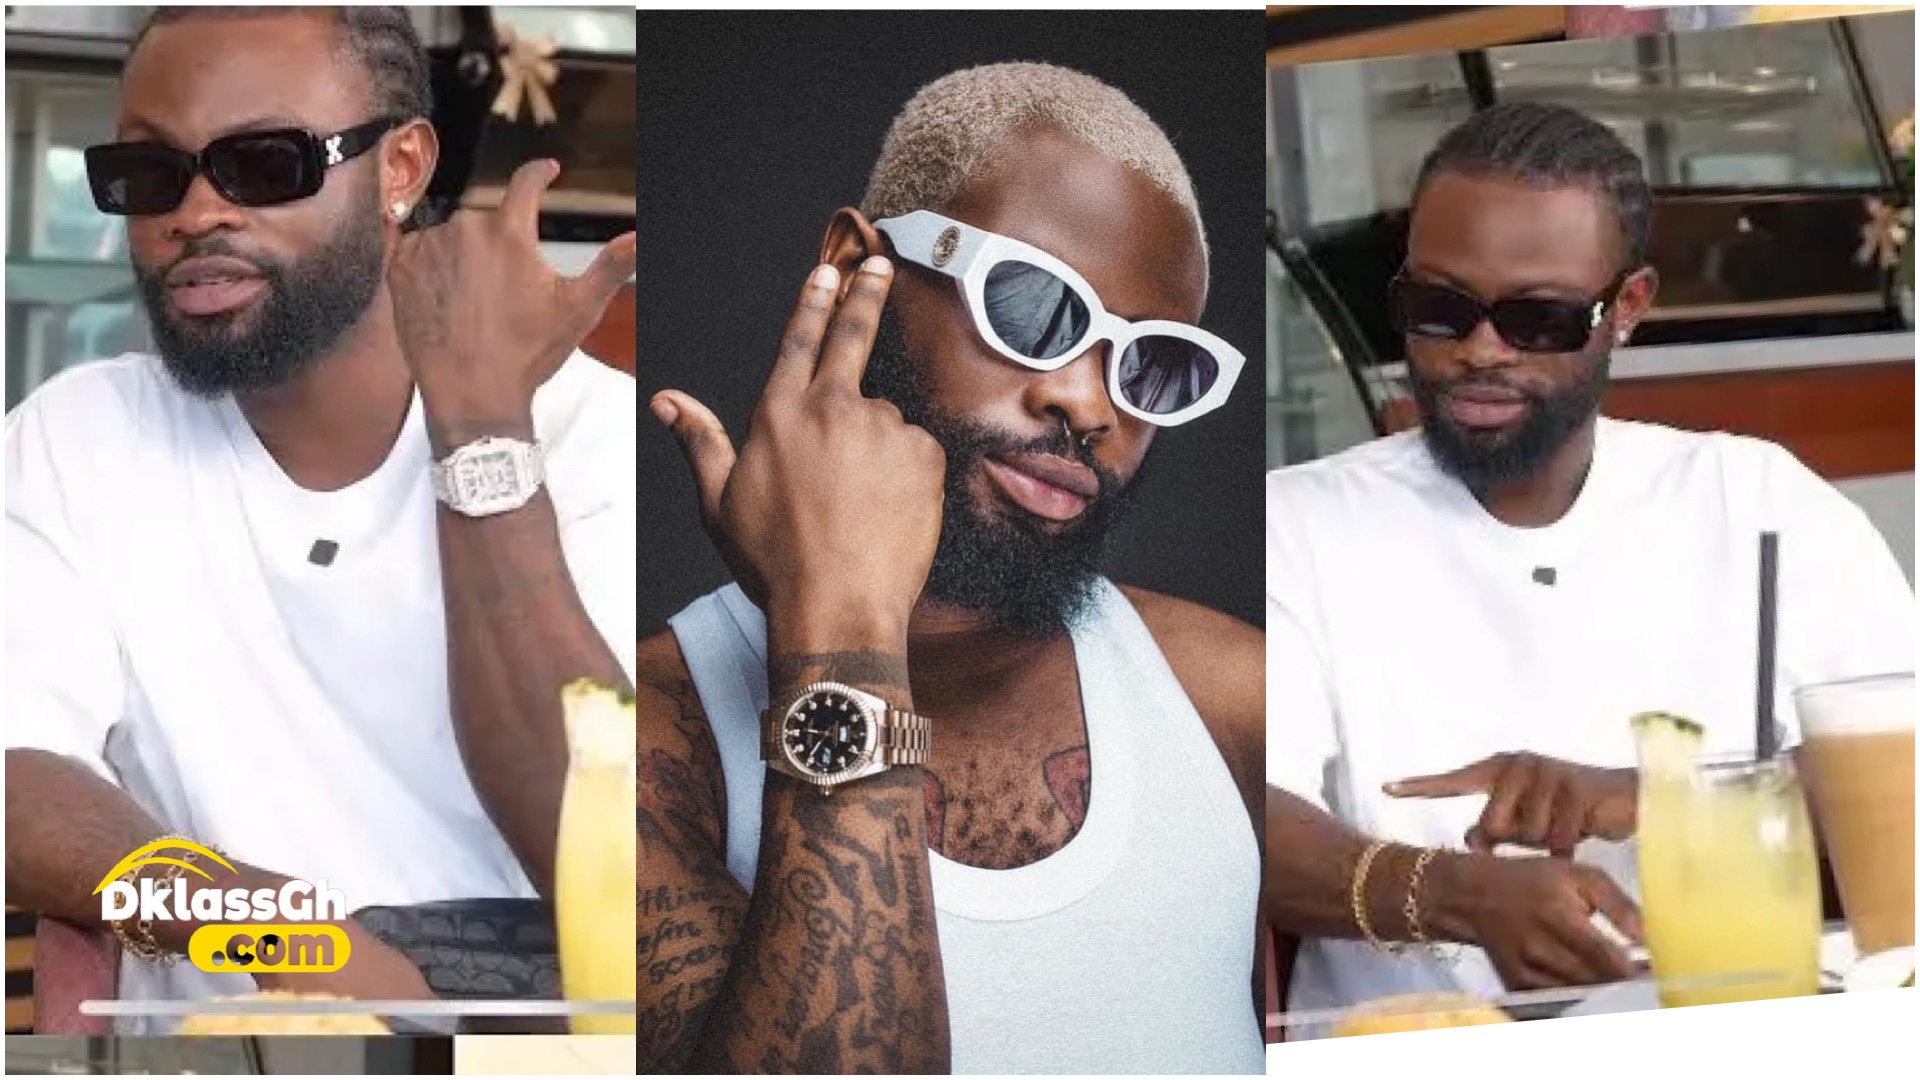 My Diamond Watch Costs $58,000, Bracelet GHS 38,000 And Car $150,000 – Rapper Tom D’Frick Brags